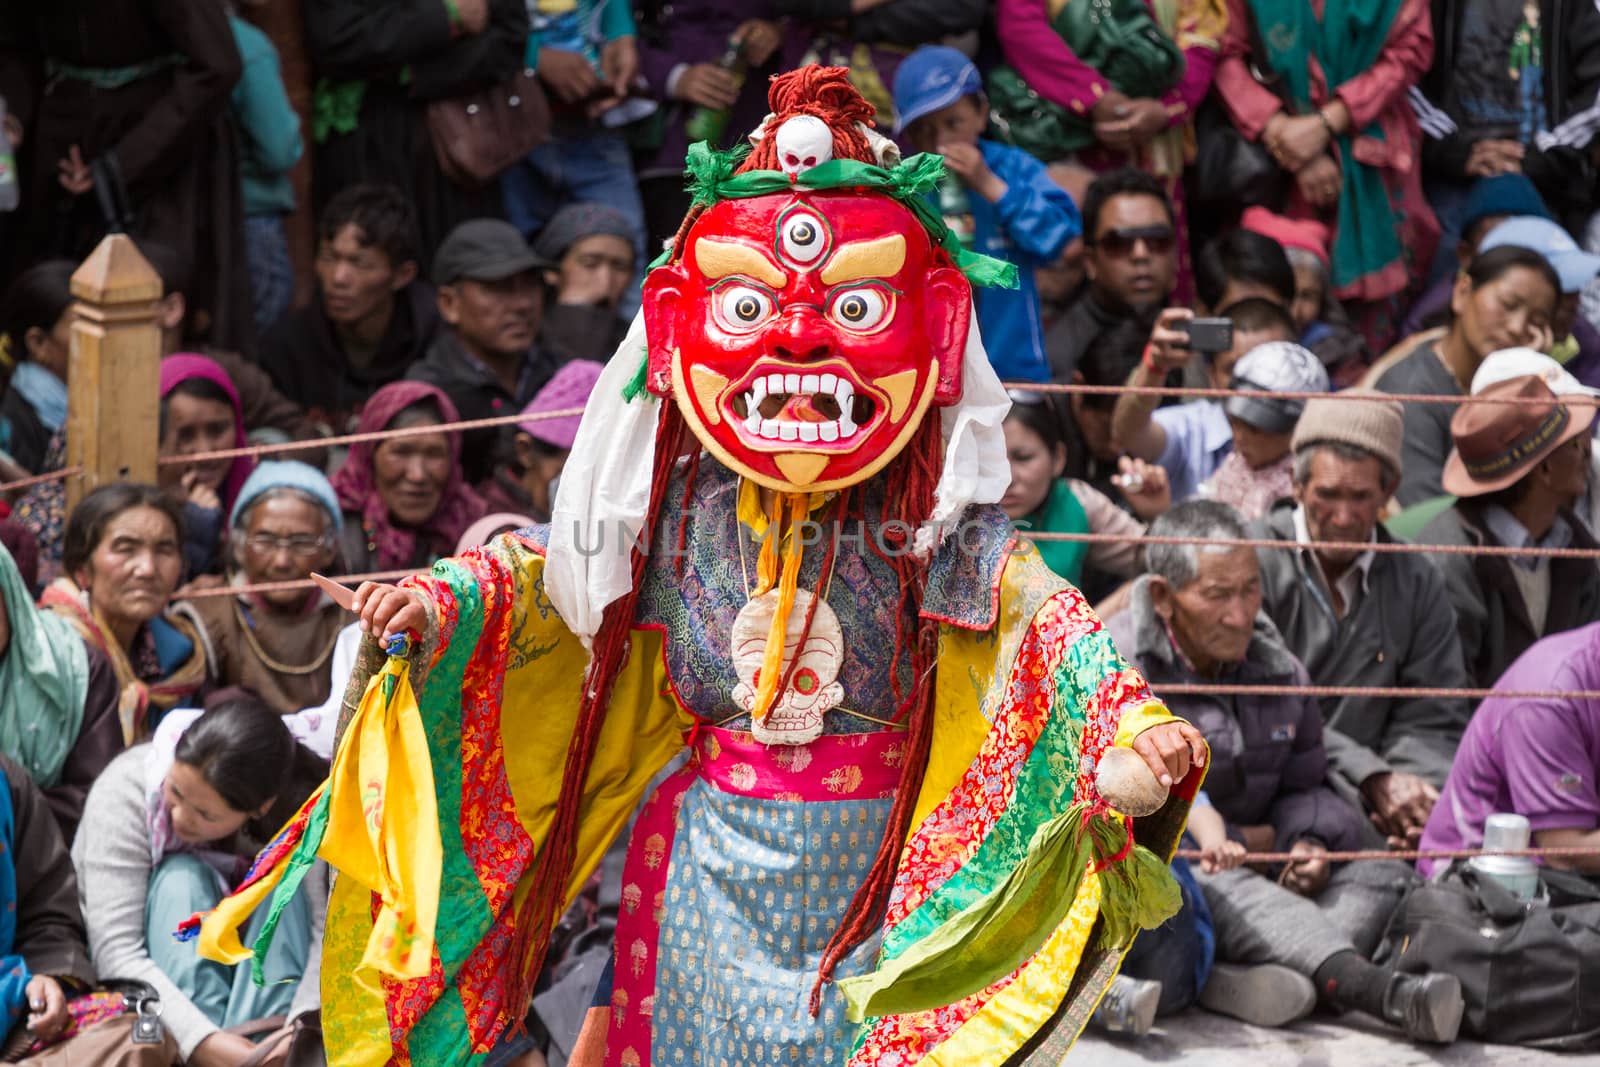 Hemis, India - June 29, 2012: unidentified monk with phurpa performs a religious masked and costumed mystery dance of Tibetan Buddhism during the Cham Dance Festival in Hemis monastery, India.